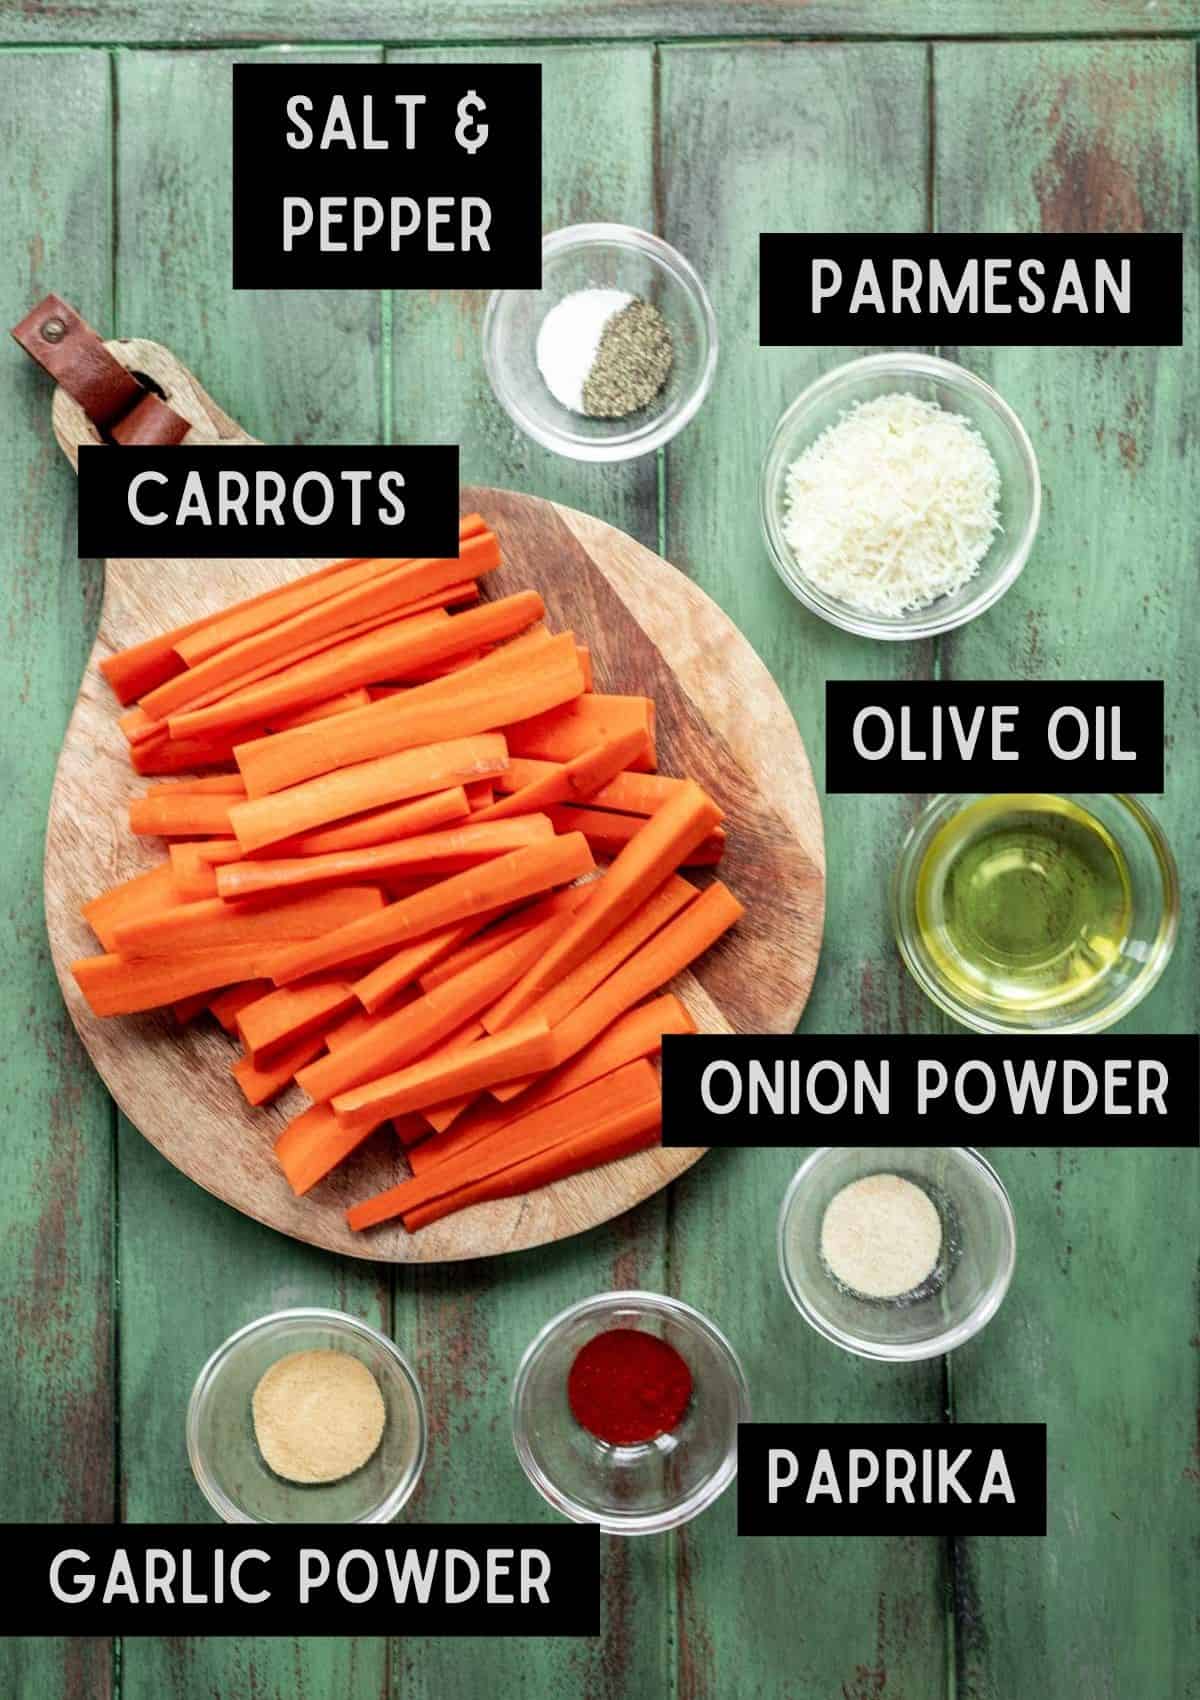 Labelled ingredients for air fryer carrot fries (see recipe for details).